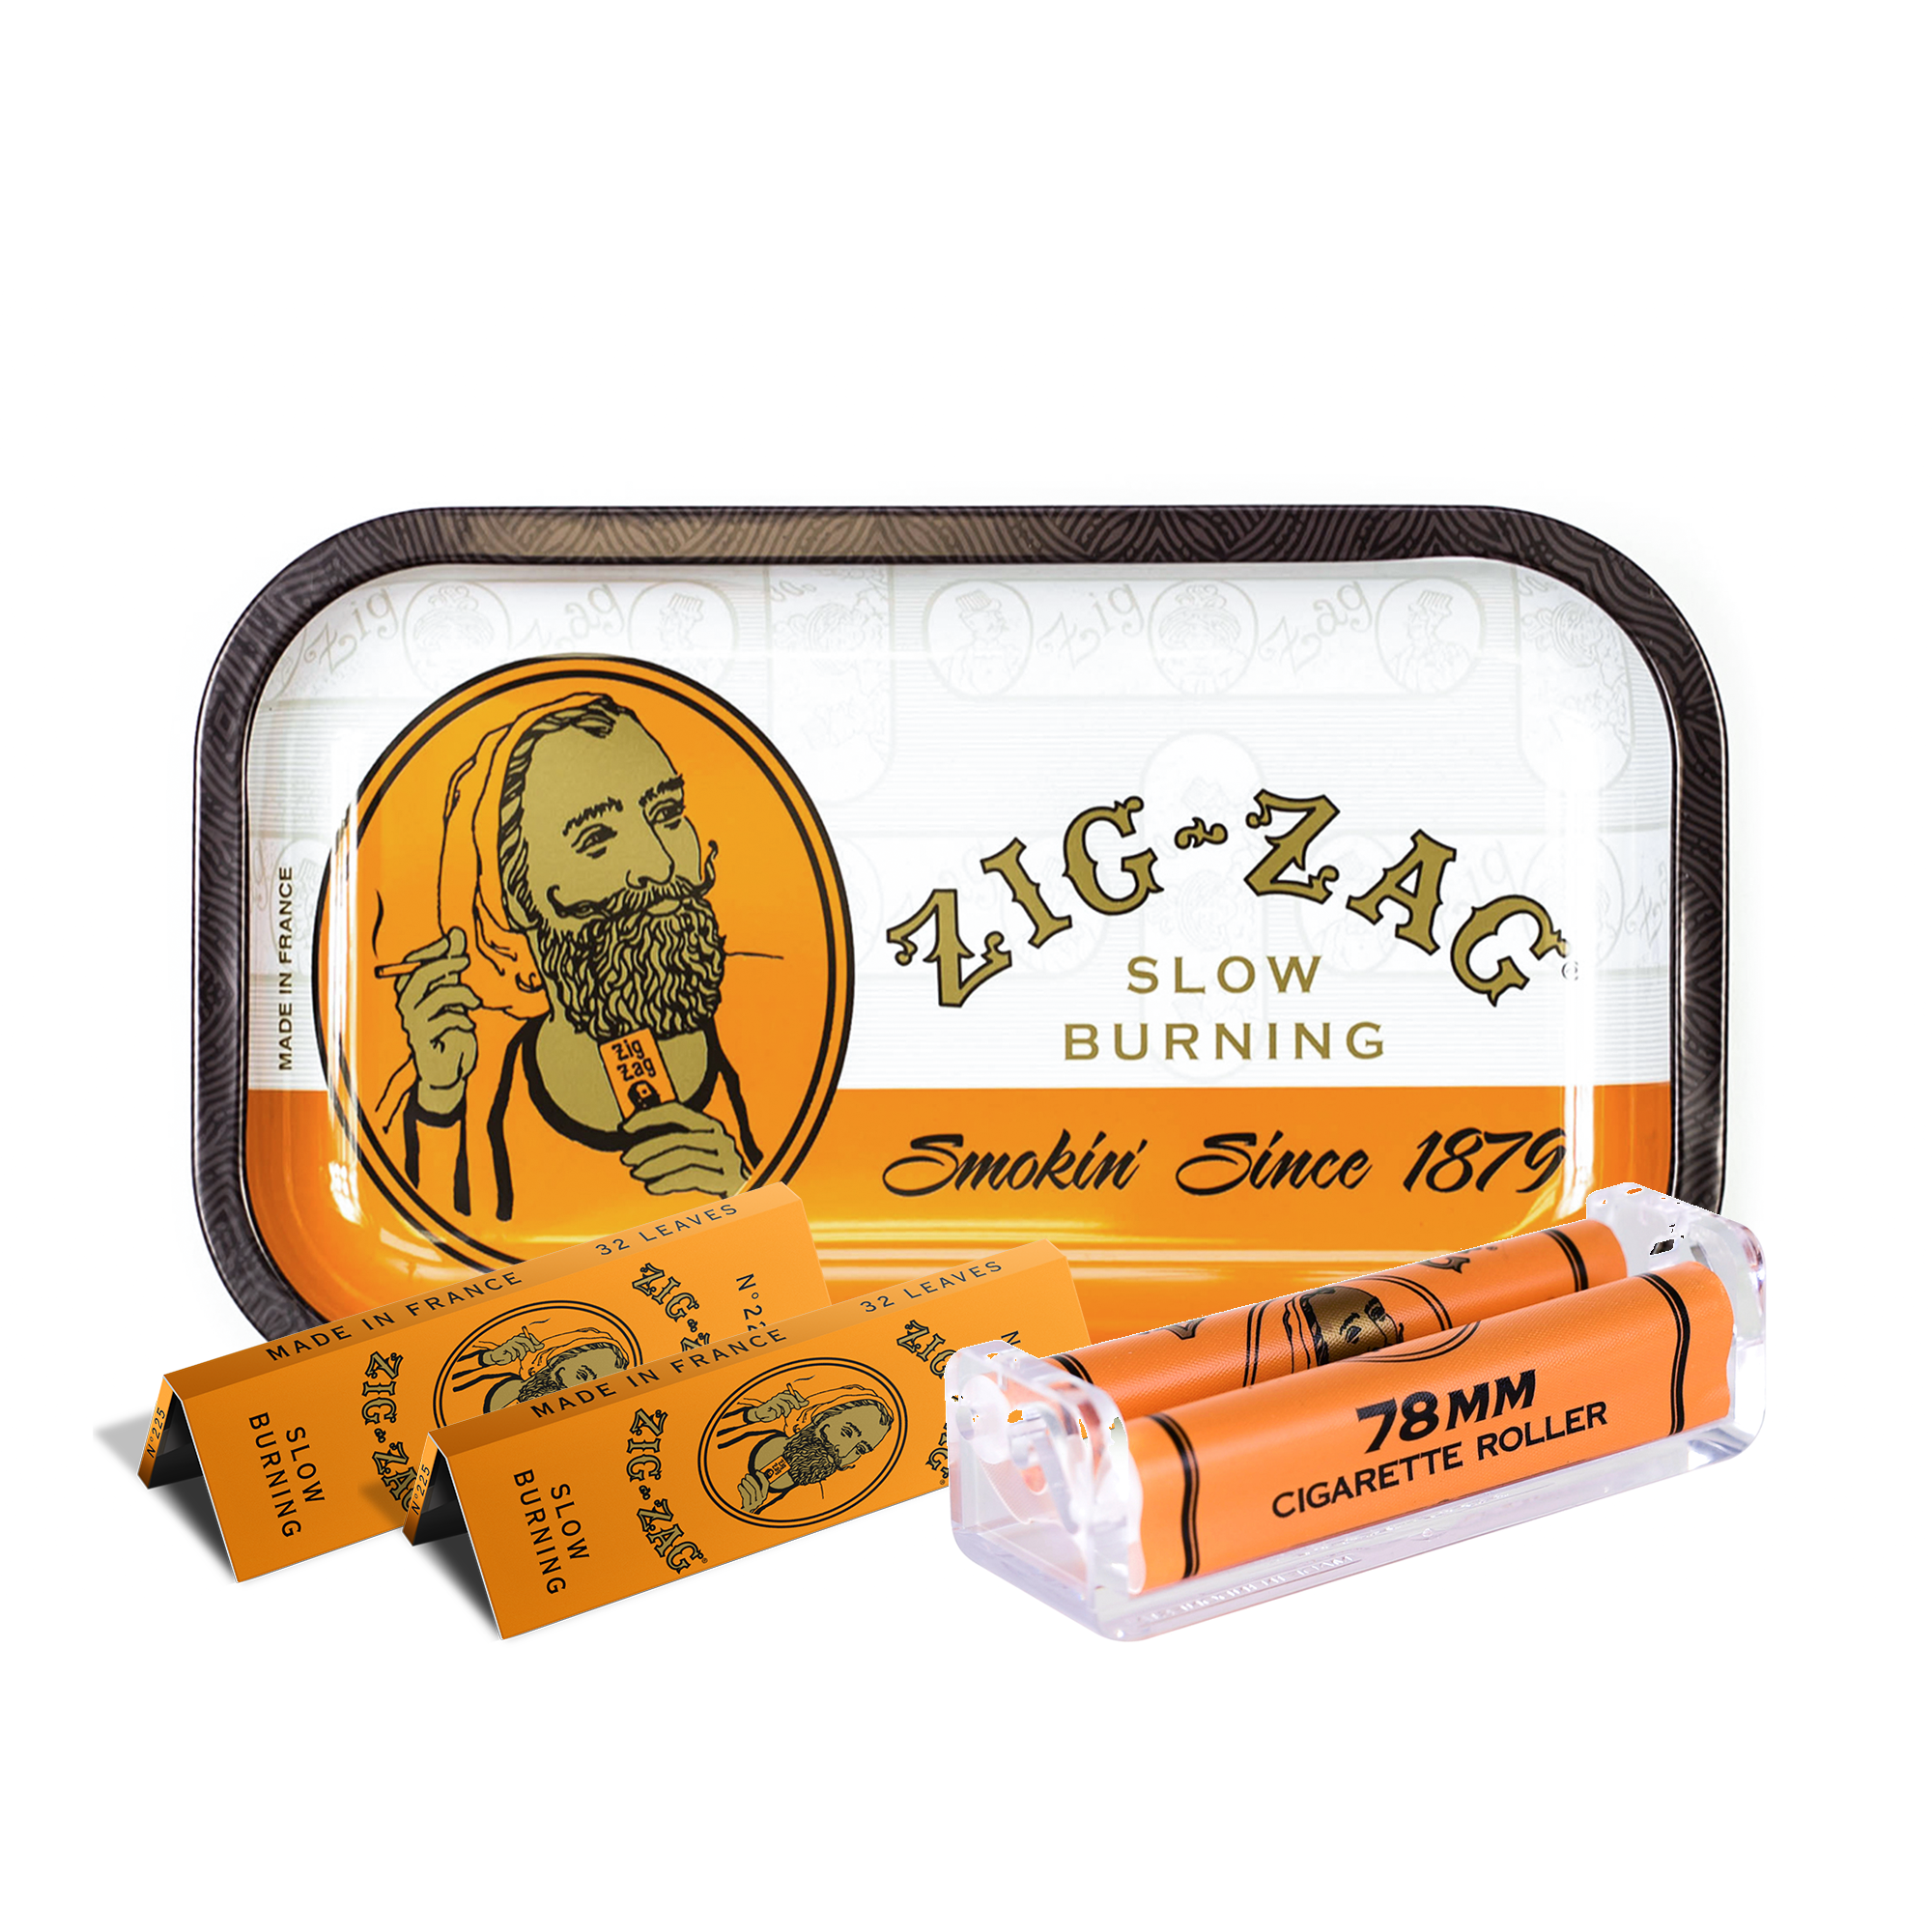  Zig-Zag Rolling Papers - 1 1/4 French Orange Rolling